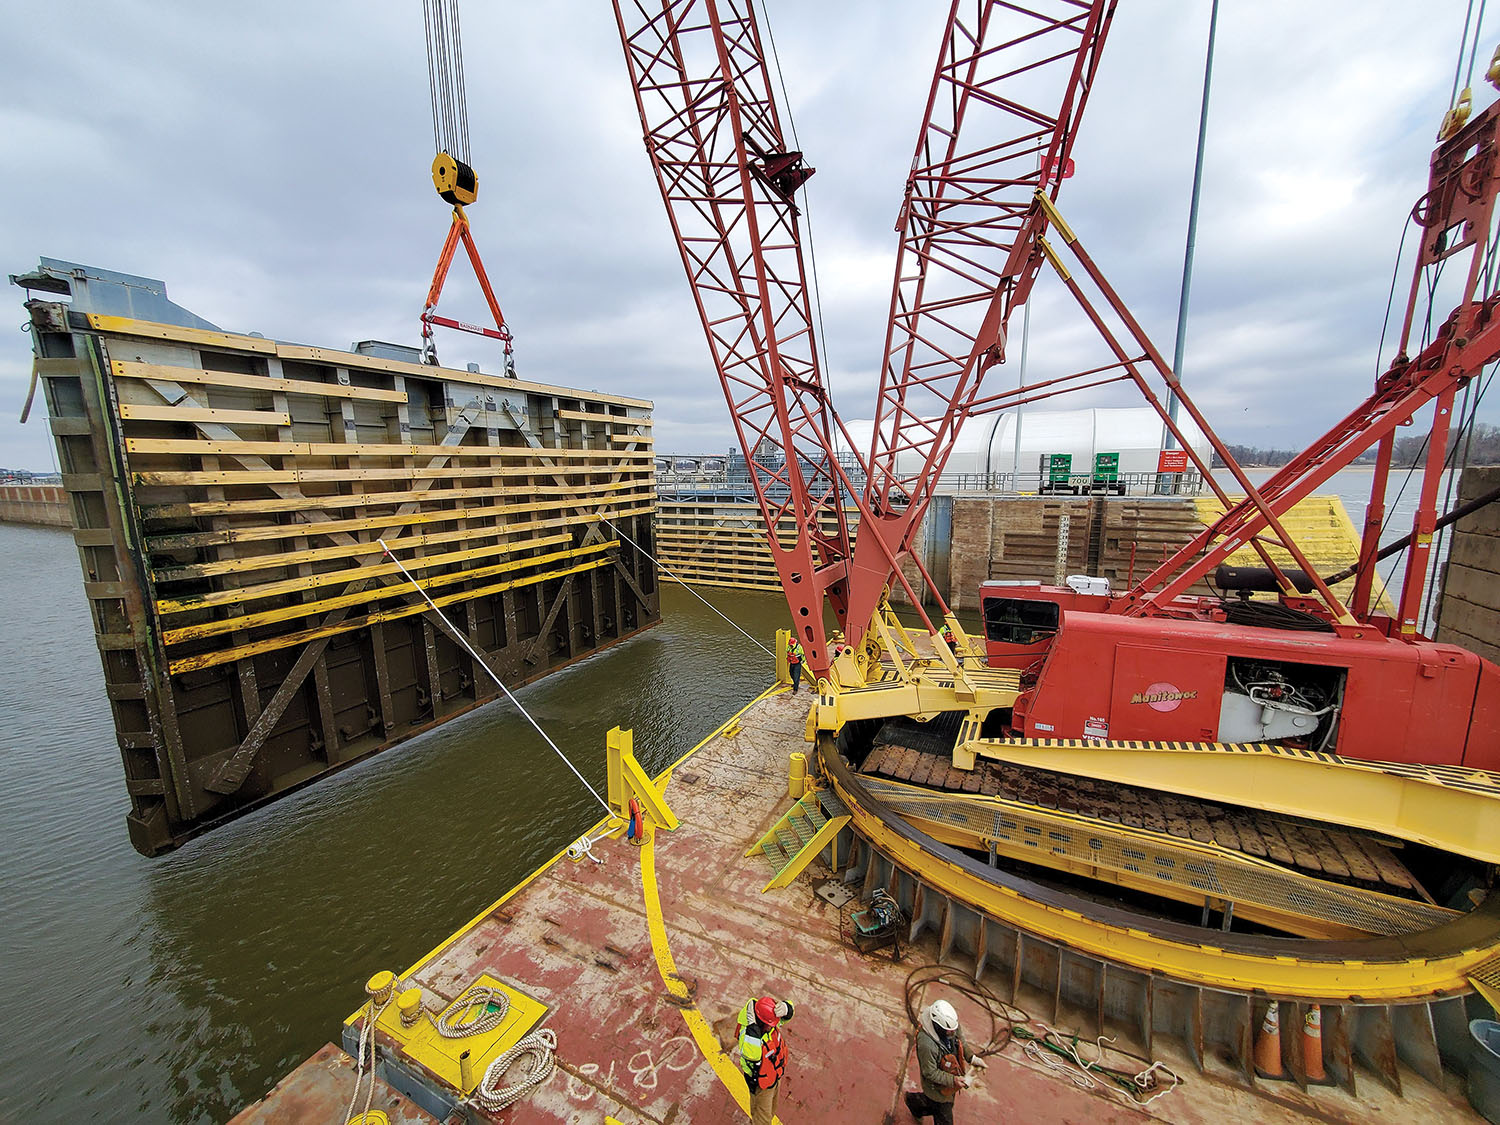 One of the two 230,000-pound miter gates is pulled January 17 by Massman Constructors’ 350-ton crane barge so maintenance crews can install new seals and conduct other work. (Photo courtesy of St. Louis Engineer District)